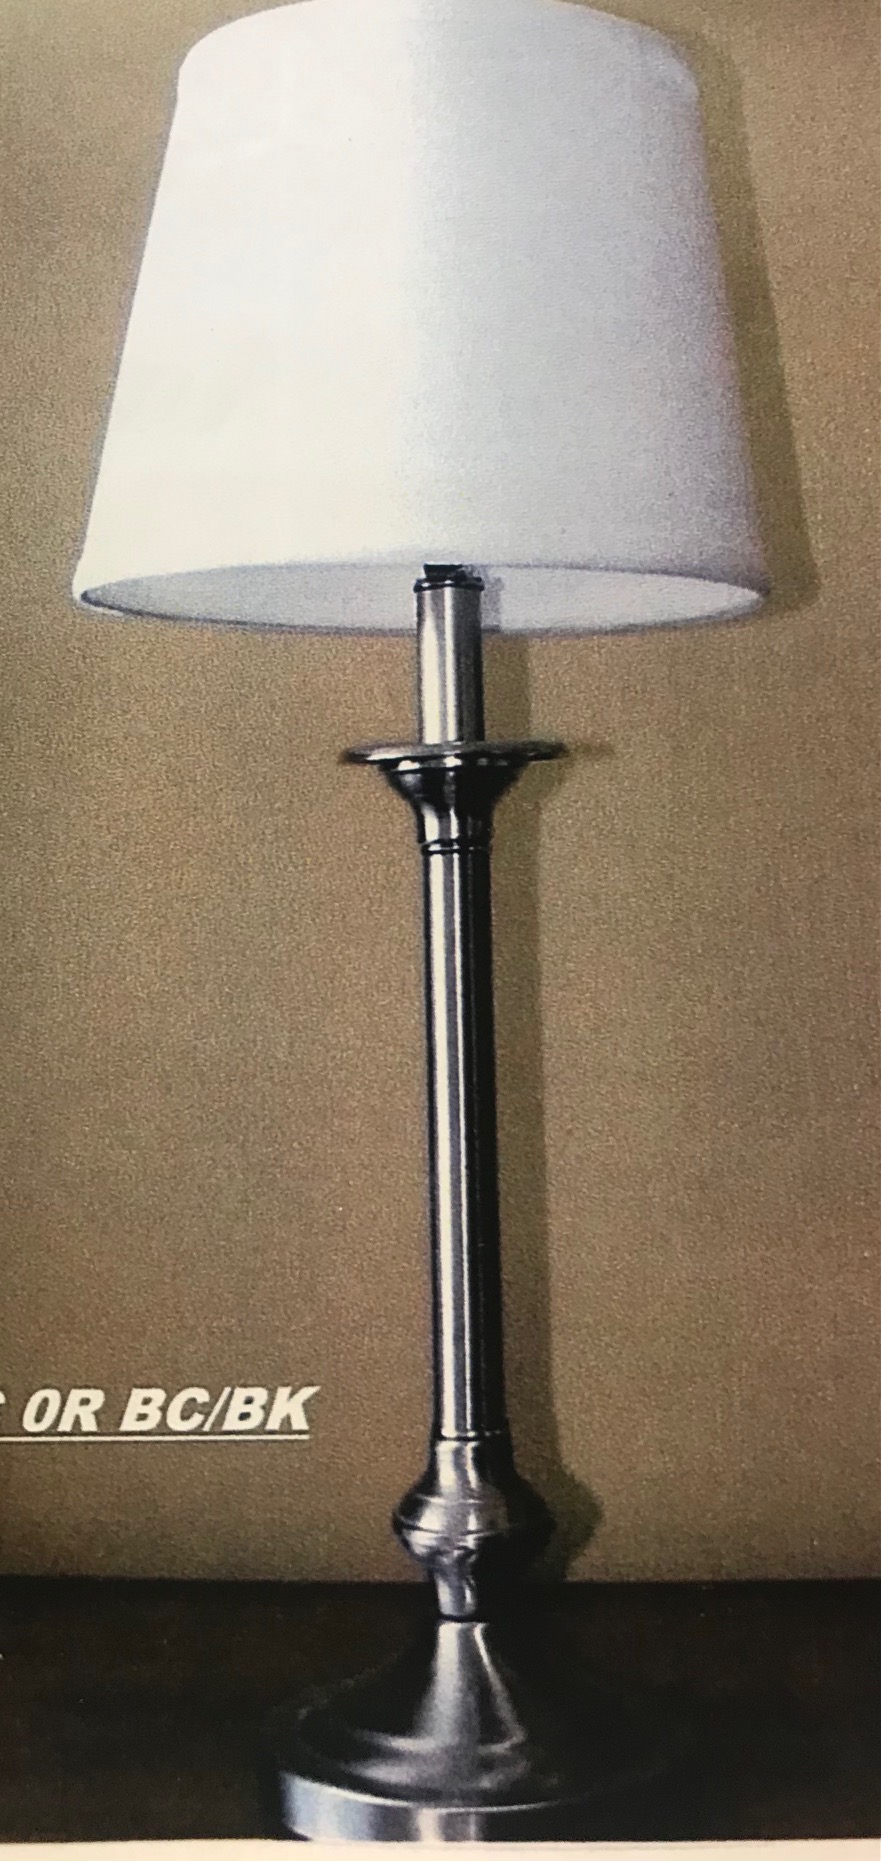 840T Table Lamp
Made in Canada
Available in Antique Brass, 
Brushed Chrome, Black or
Antique Bronze
Regular Price $162.99
Sale Price $114.99